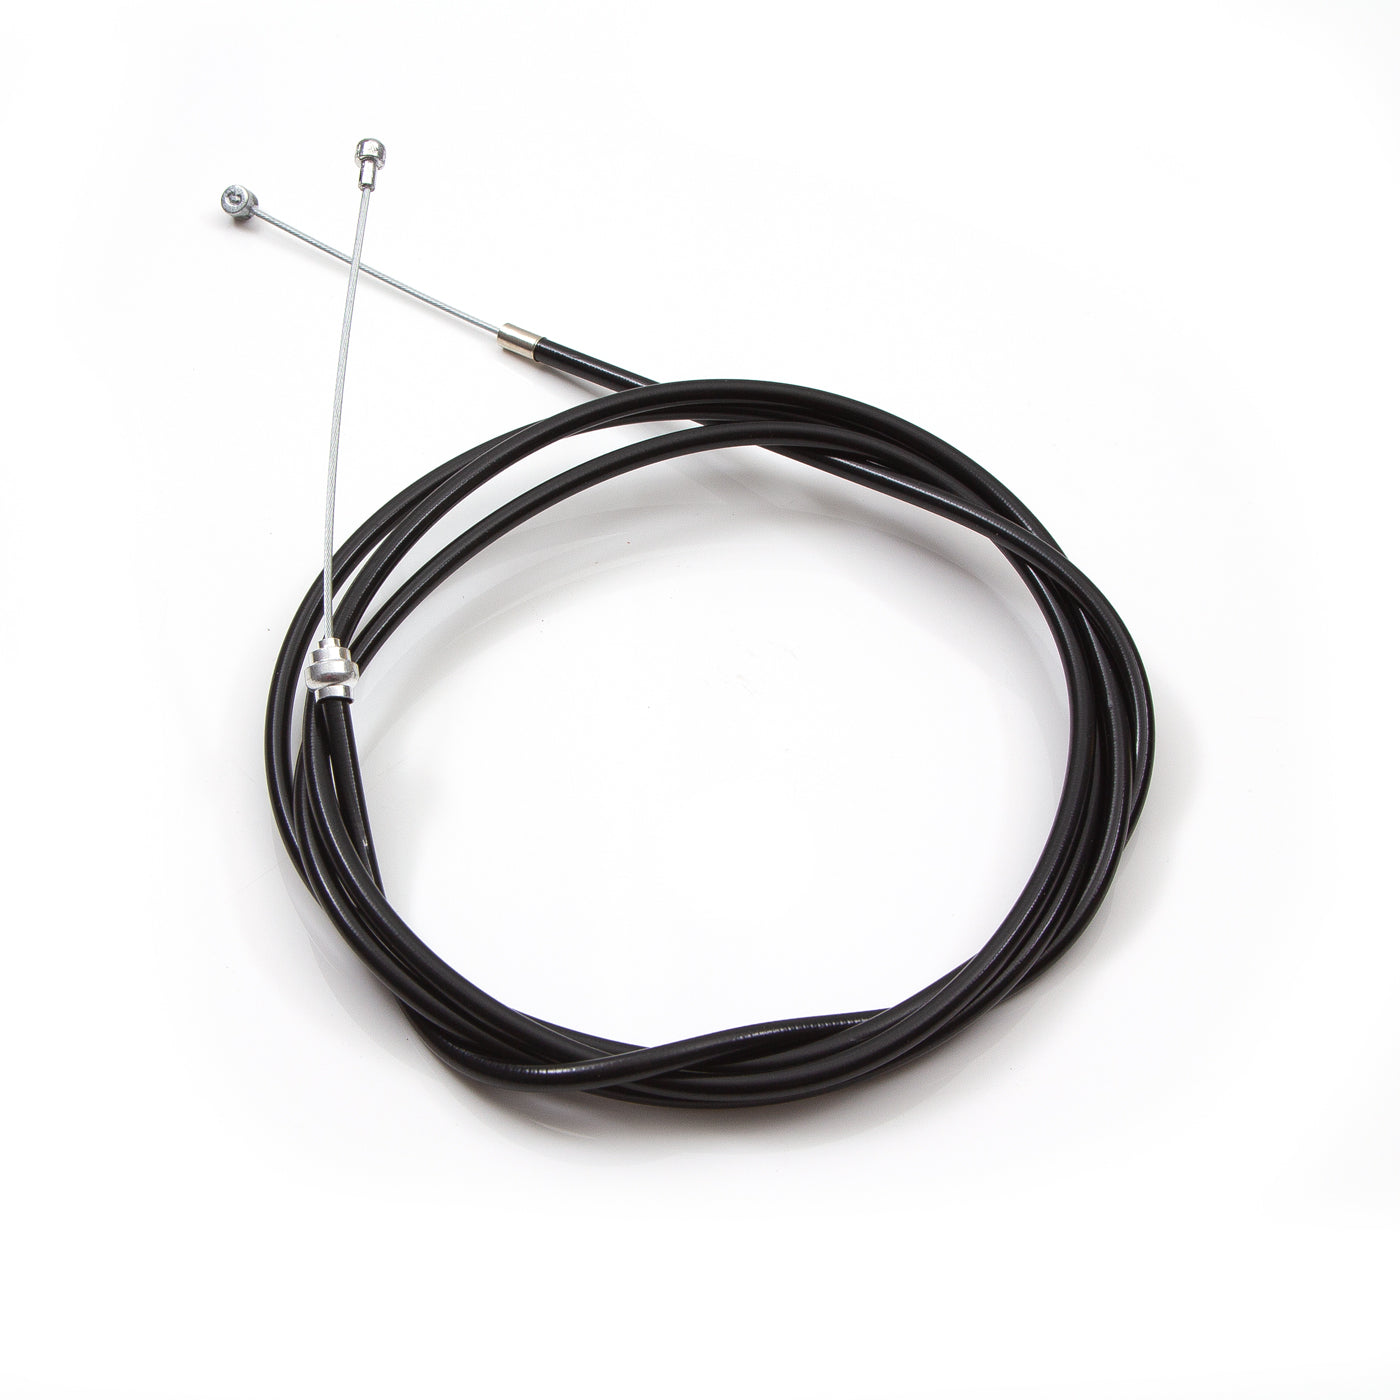 View Clarks Brake Cable Road and Hybrid Bikes Front Rear Front Rear Rear Brake information